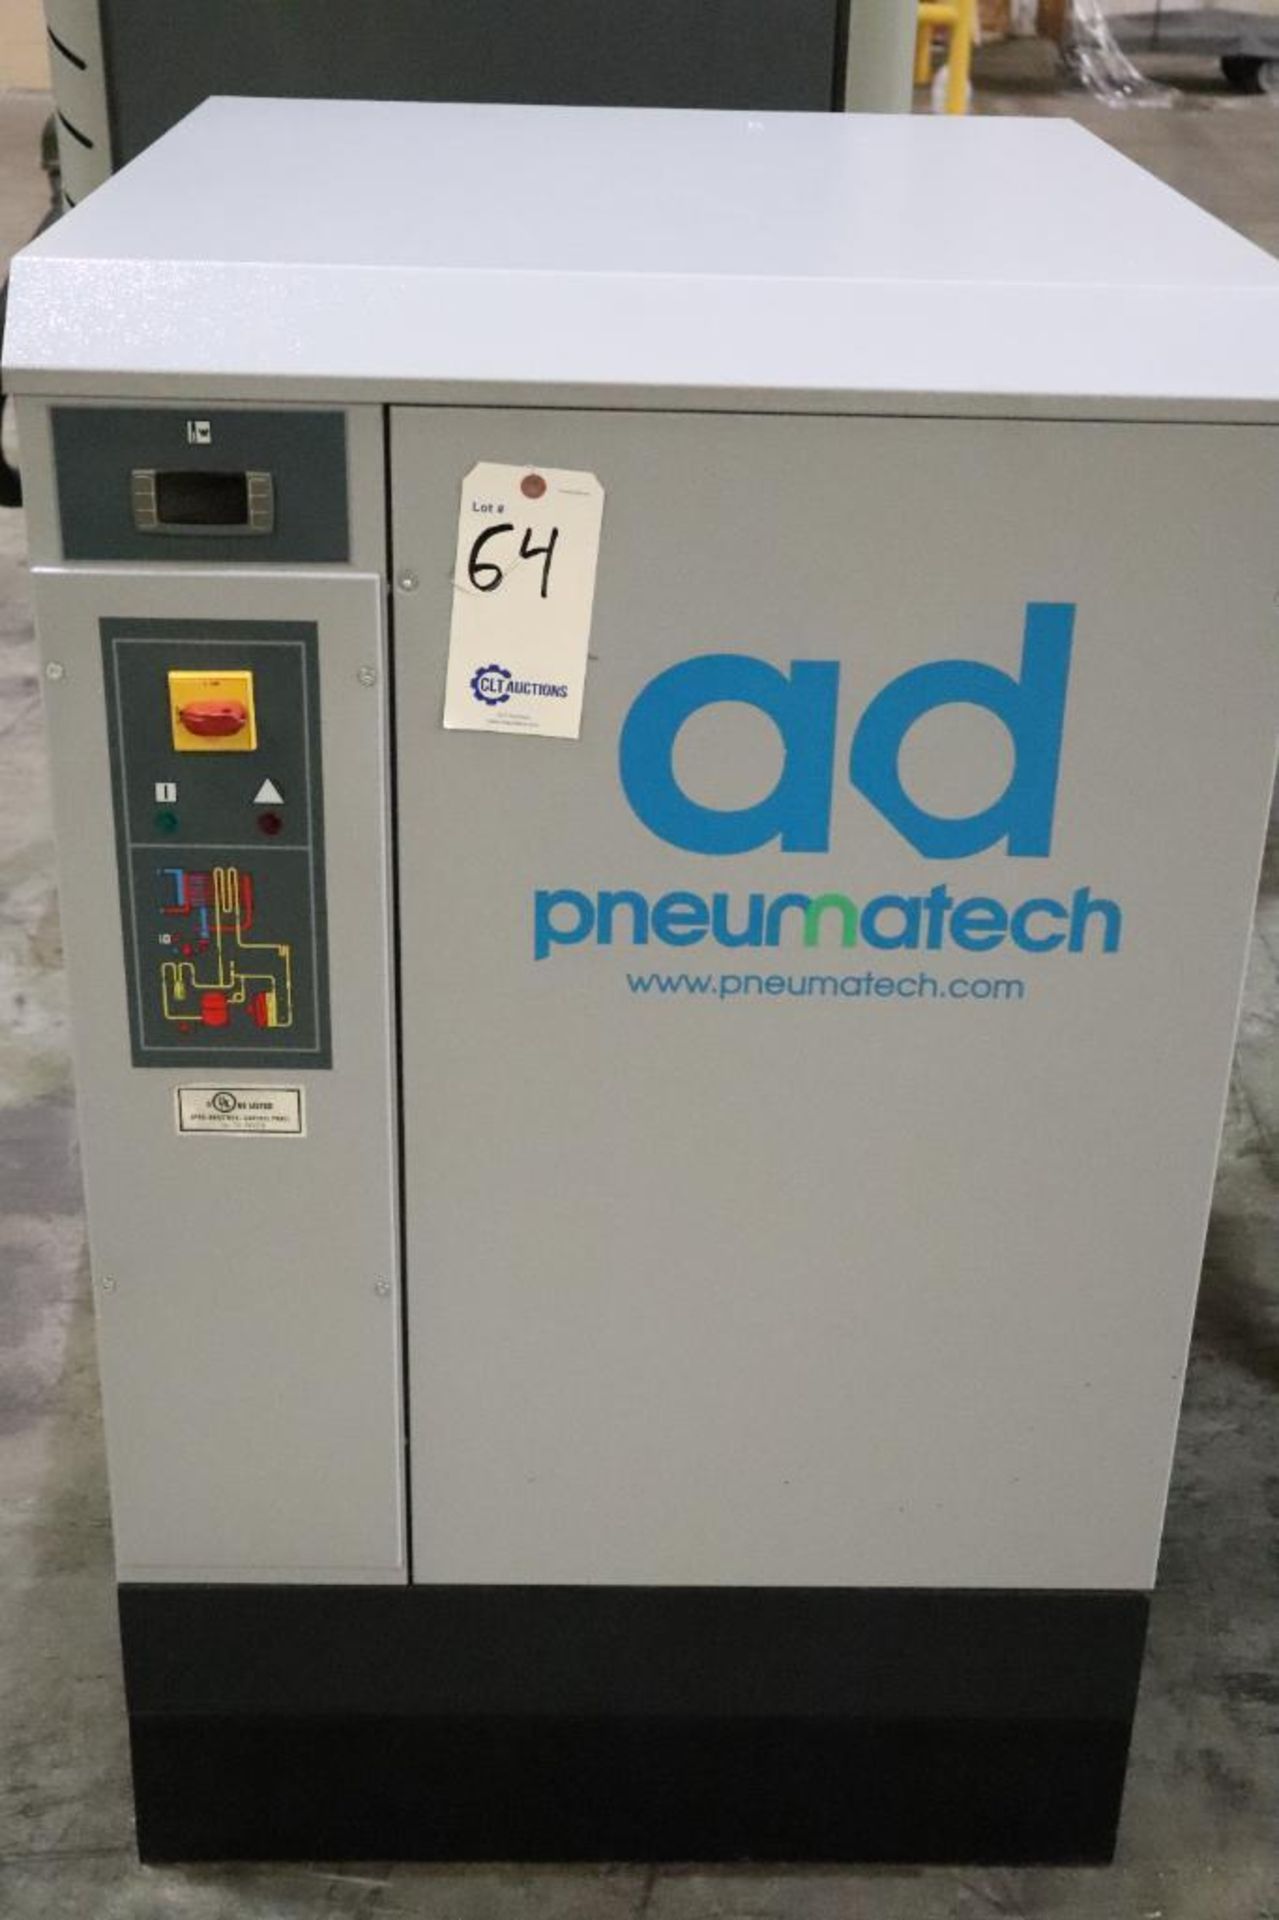 Pneumatech AD 500 CFM Refrigerated Air Dryer - Image 2 of 4